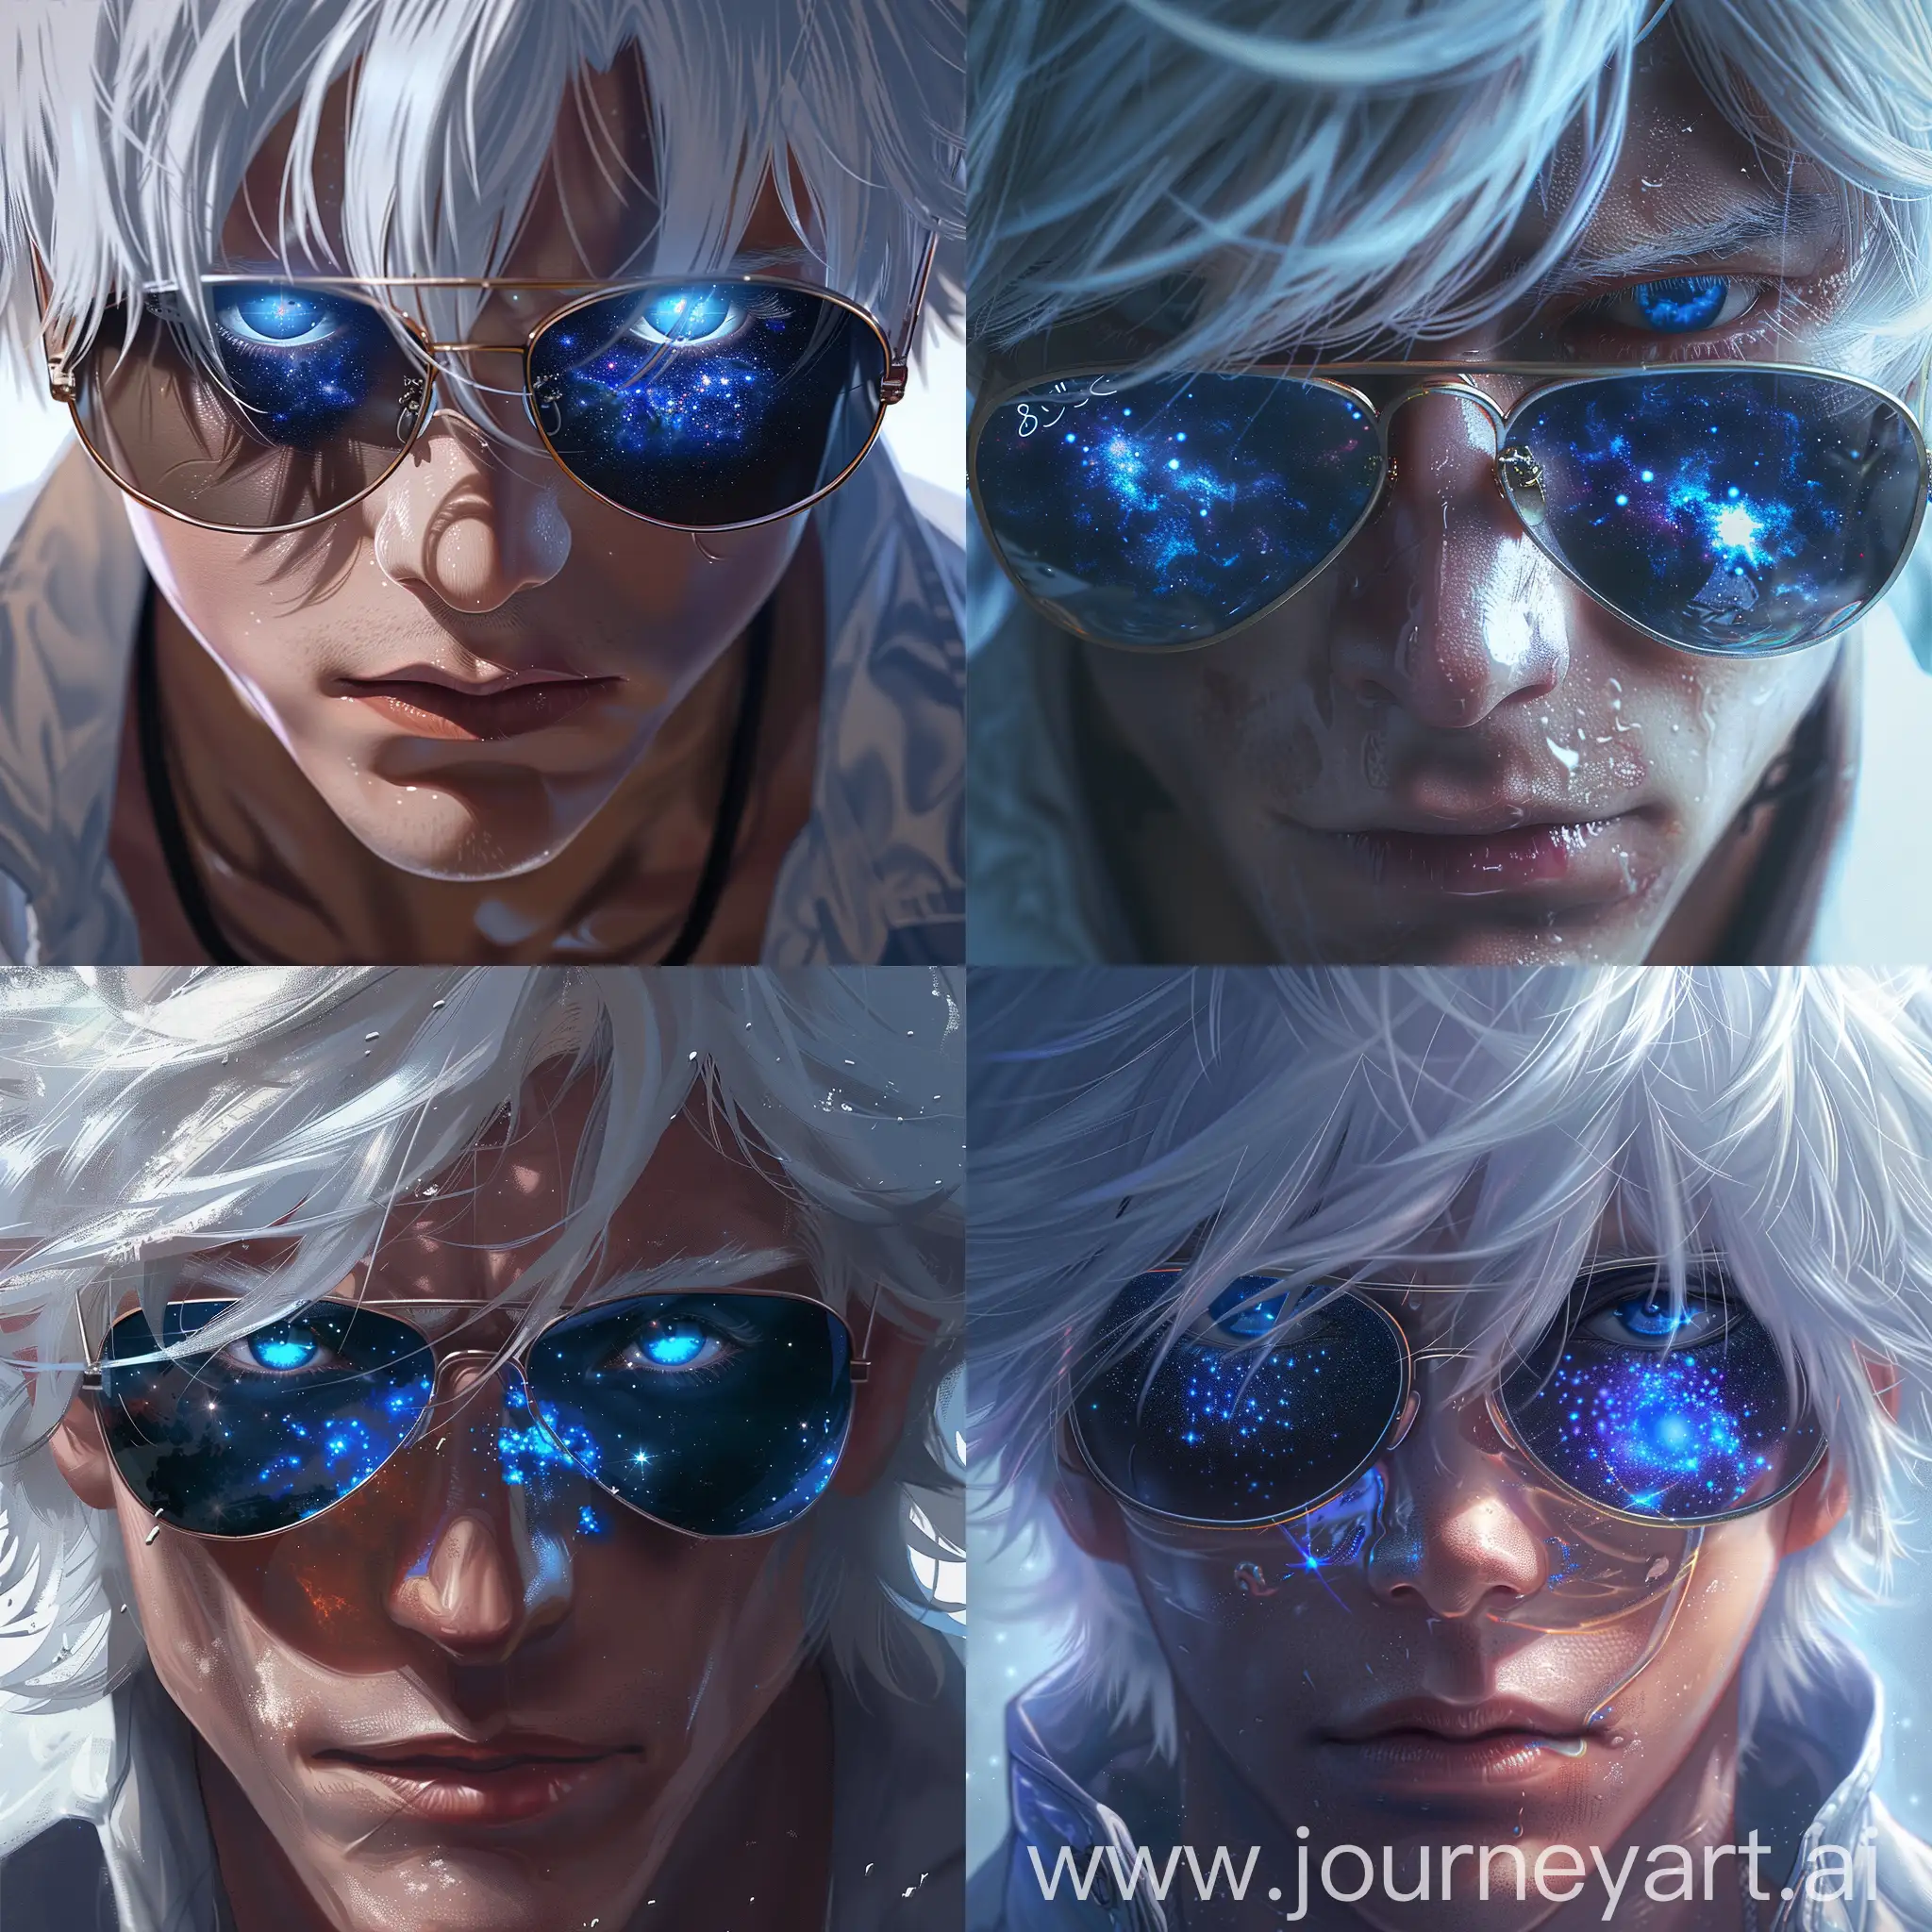 Satoru Gojo, Jujutsu Kaisen, Handsome man with white medium length hair, wearing sunglasses and blue galaxy in his eyes, Sunglasses on the bridge of his nose, revealing his deep blue eyes, looking at viewers, hyper-realistic atmospheres, details, 8k